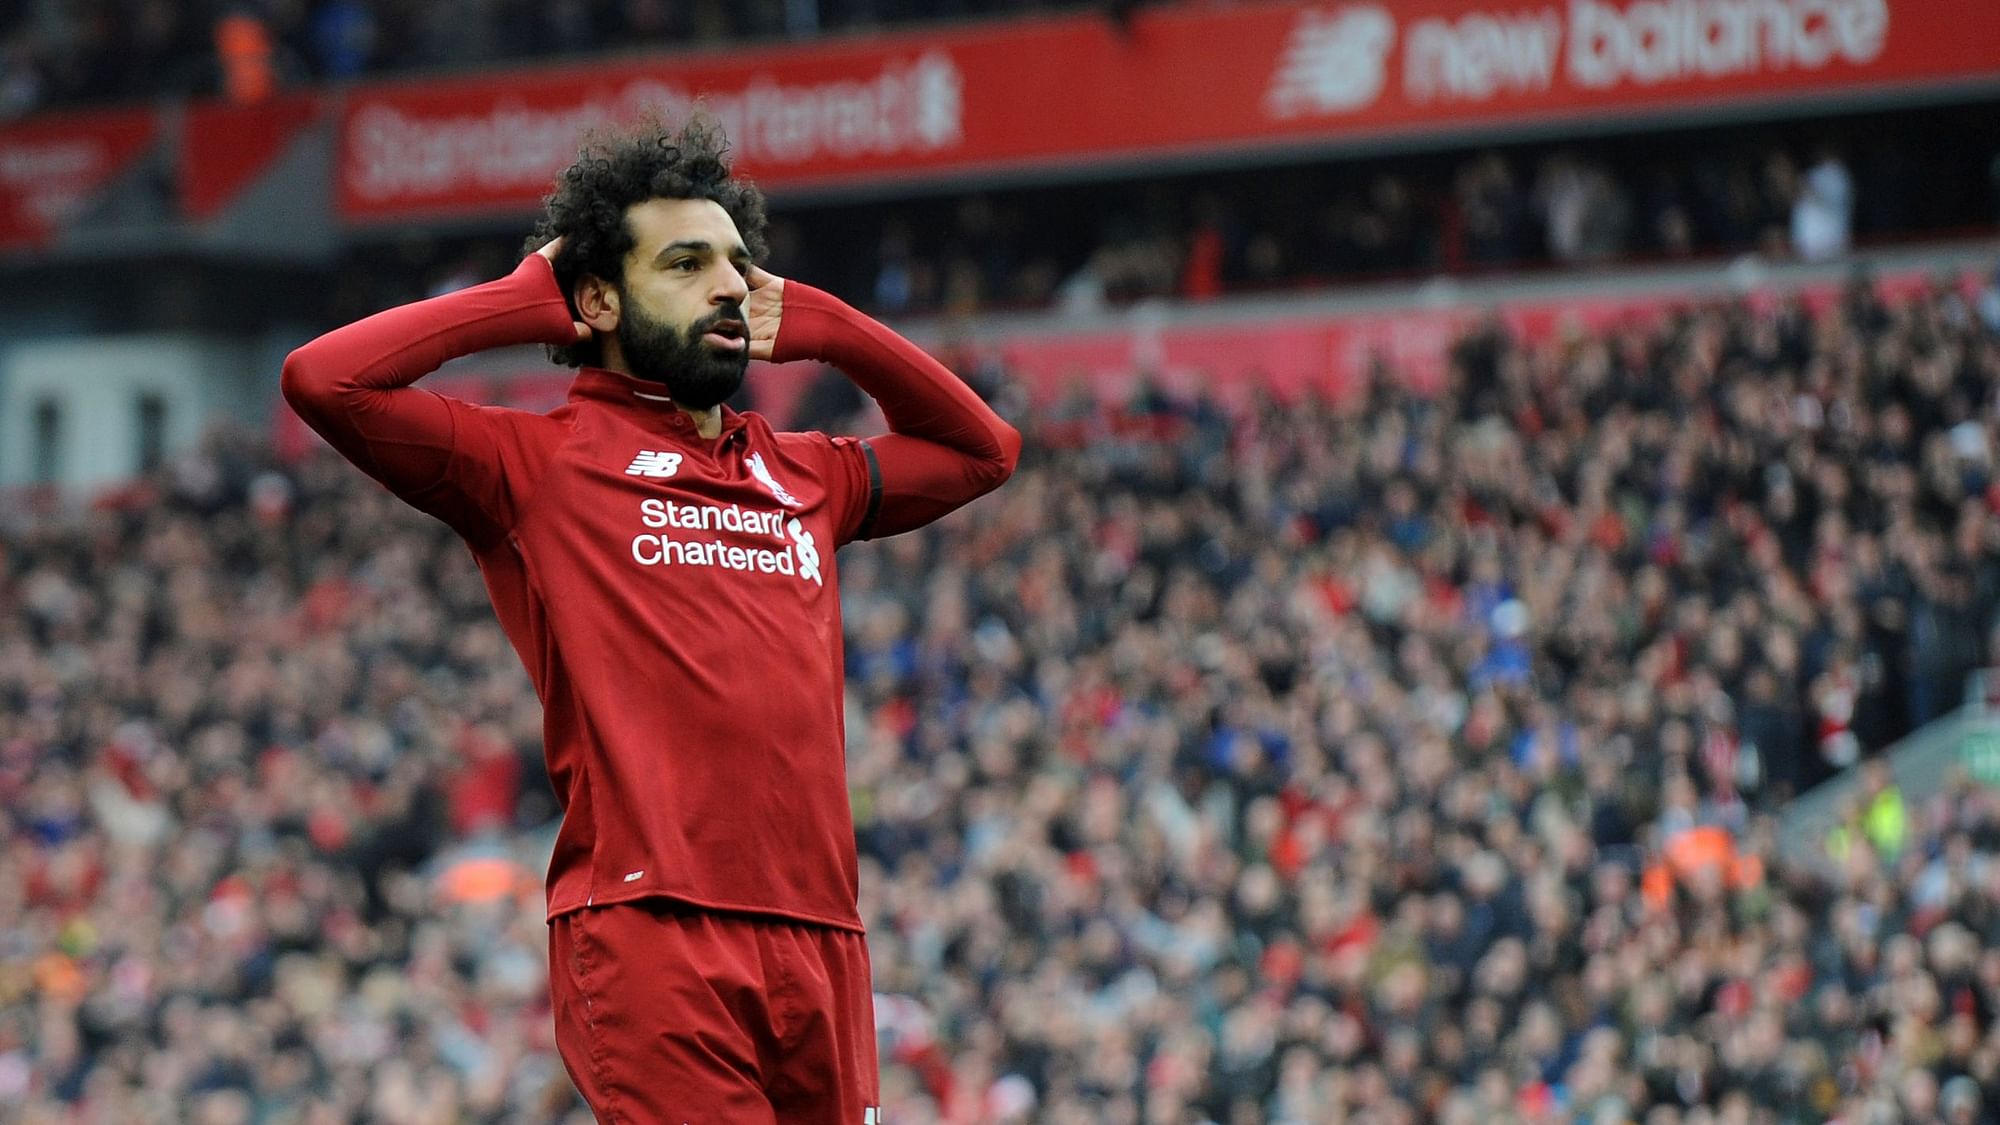 Mohamed Salah celebrates after scoring his side’s second goal during the English Premier League football match between Liverpool and Chelsea at Anfield stadium.